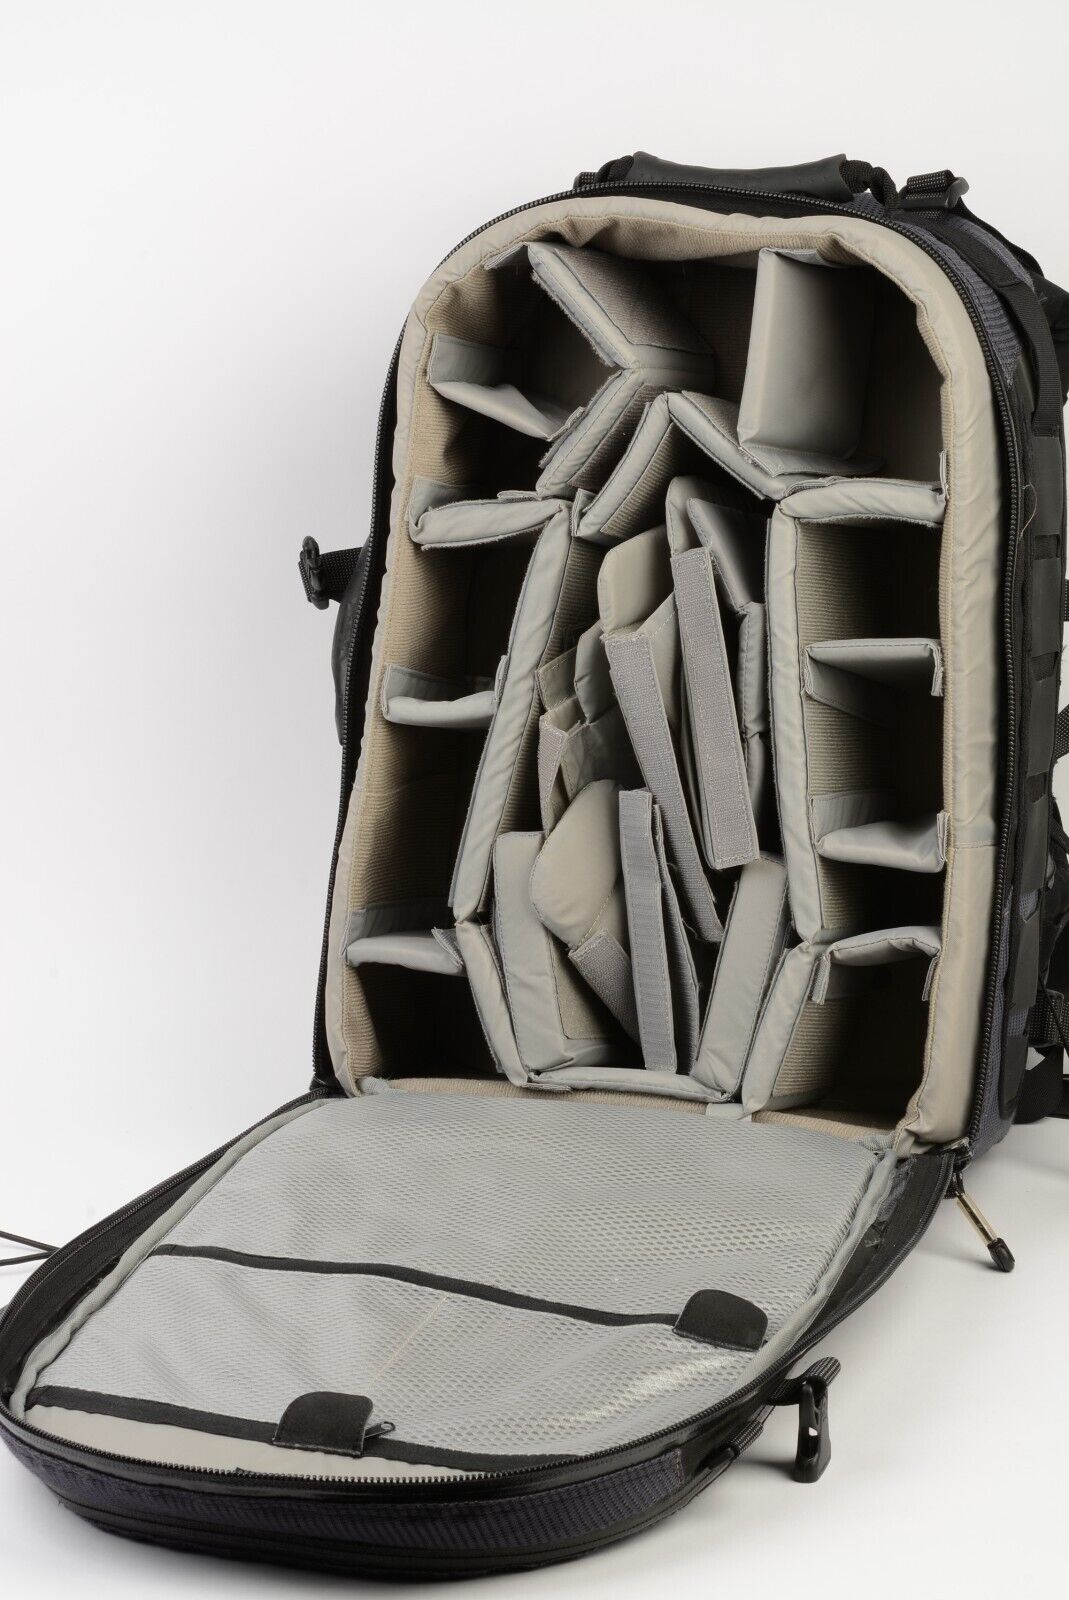 Going on an Extreme Photography Adventure? Lowepro's New Bag Will Keep Gear  Dry | Fstoppers